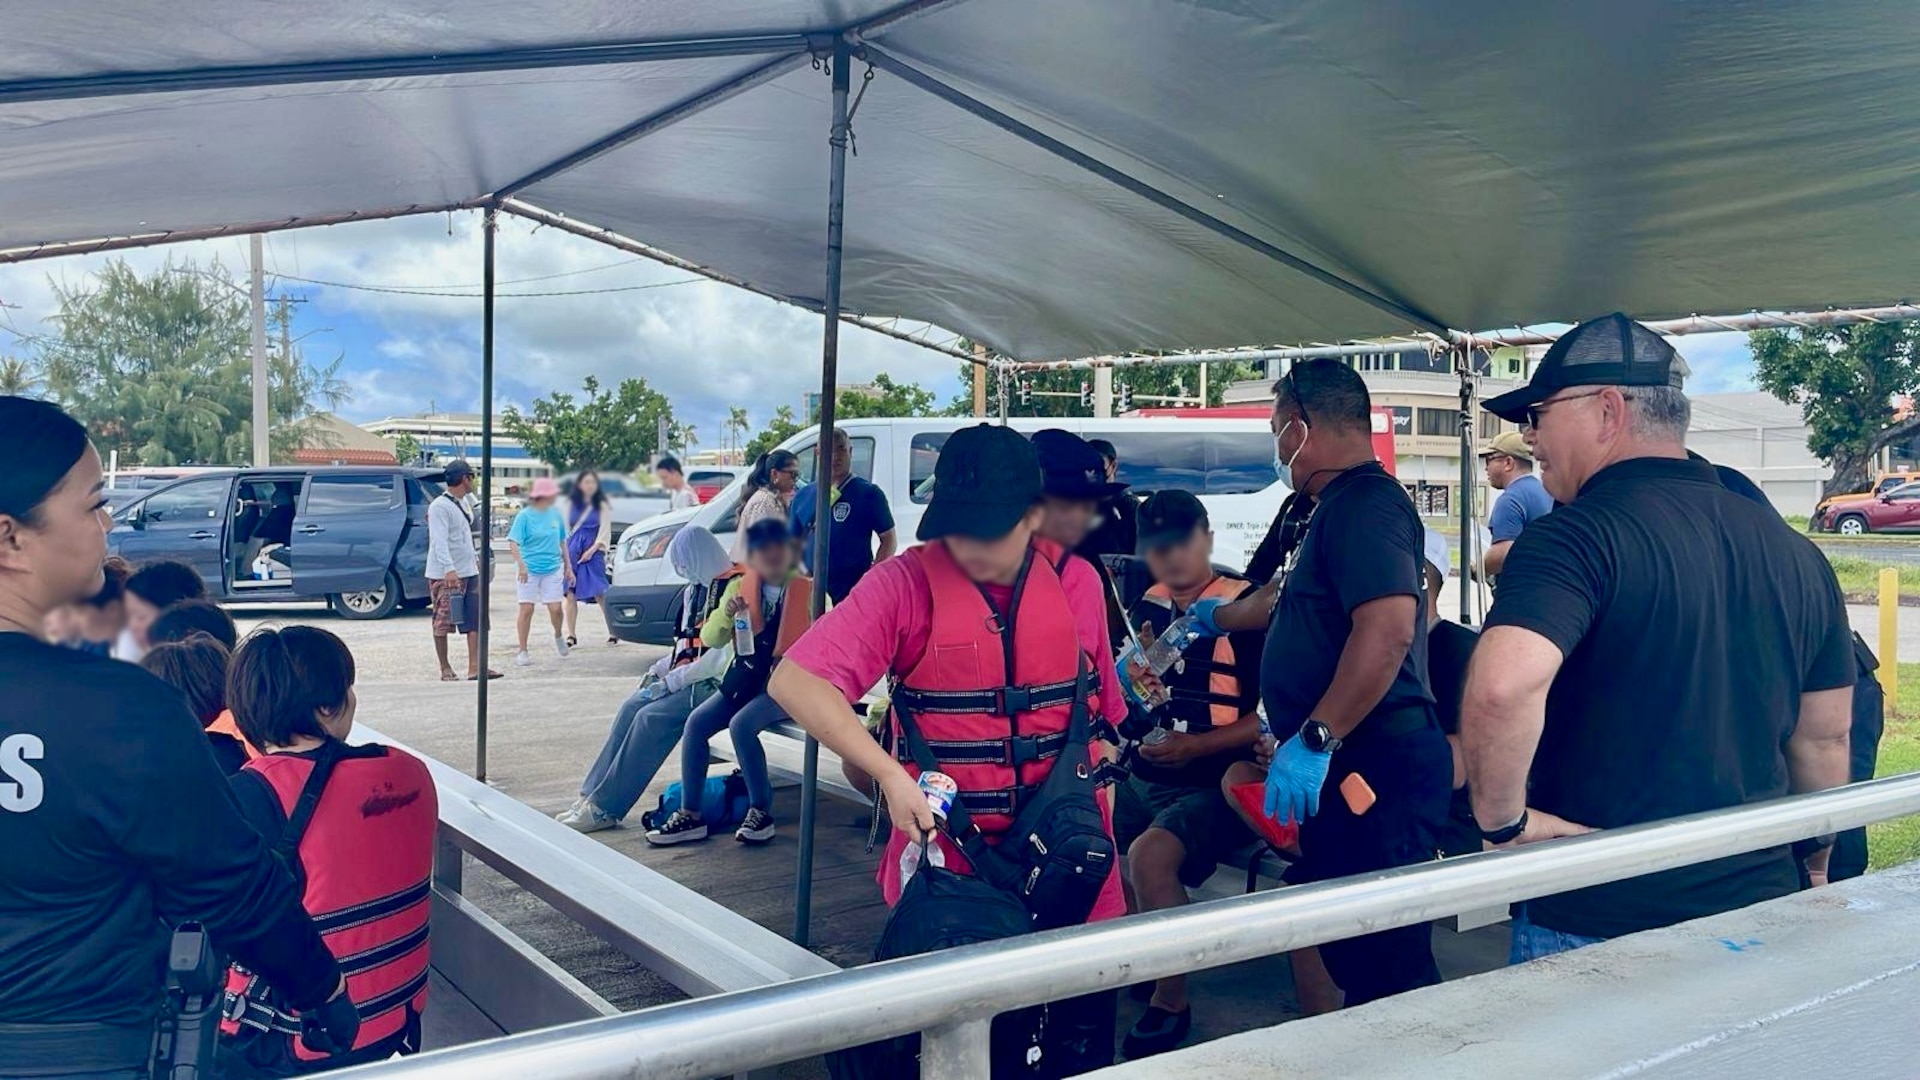 U.S. Coast Guard Forces Micronesia/Sector Guam, demonstrating preparedness and efficiency, successfully conducted a search and rescue operation for a distressed vessel 13 nautical miles north of Guam on June 23, 2024, saving 13 boaters. The Joint Rescue Sub-Center, operated by U.S. Coast Guard watchstanders in Guam, received an urgent notification from Guam Fire Rescue and 911 dispatch of a 23-foot recreational vessel, the Helen, with 13 people aboard potentially identified as nationals of the People's Republic of China, out of gas and adrift. A U.S. Coast Guard Station Apra Harbor 45-foot Response Boat-Medium crew transported the survivors to Hagåtña, where partner agency officials met them at the pier for further care and assessment. (U.S. Coast Guard photo)